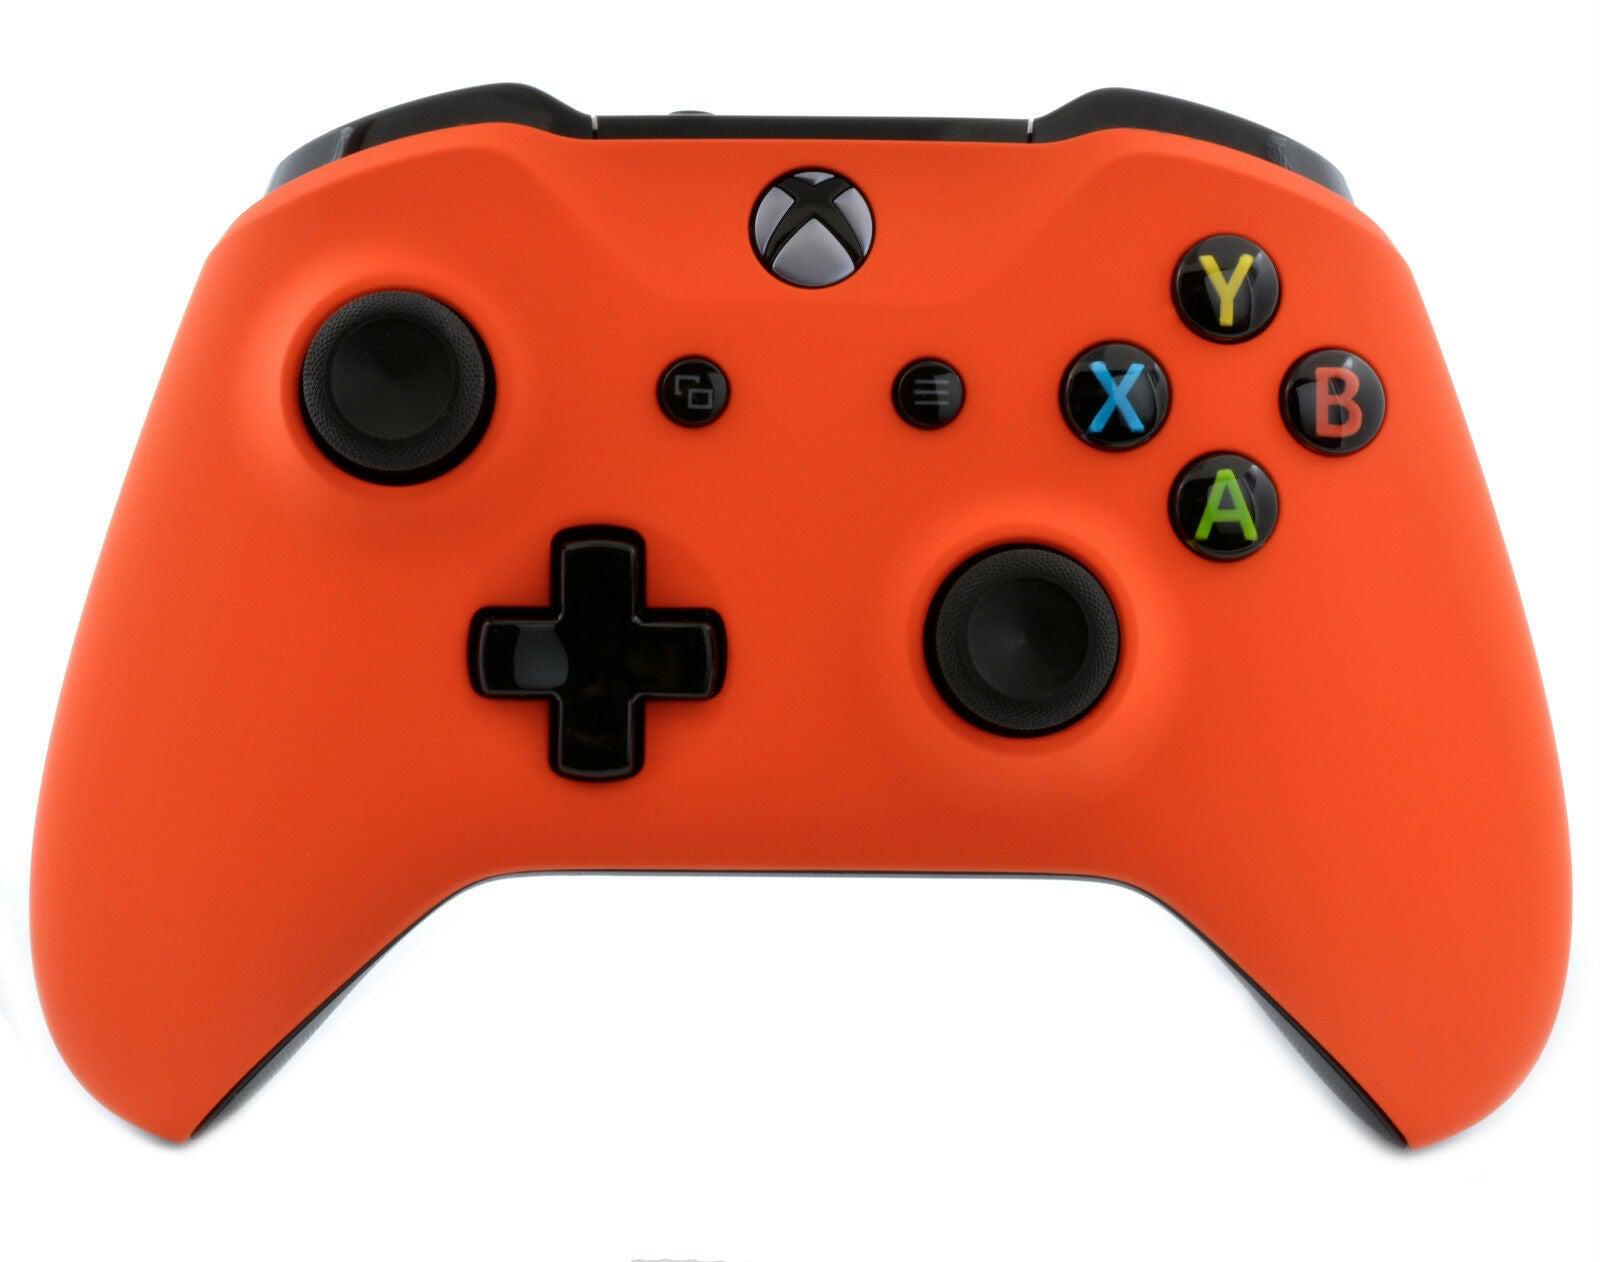 Xbox Wireless Controller - Orange | Soft Touch | Added Grip For Gameplay